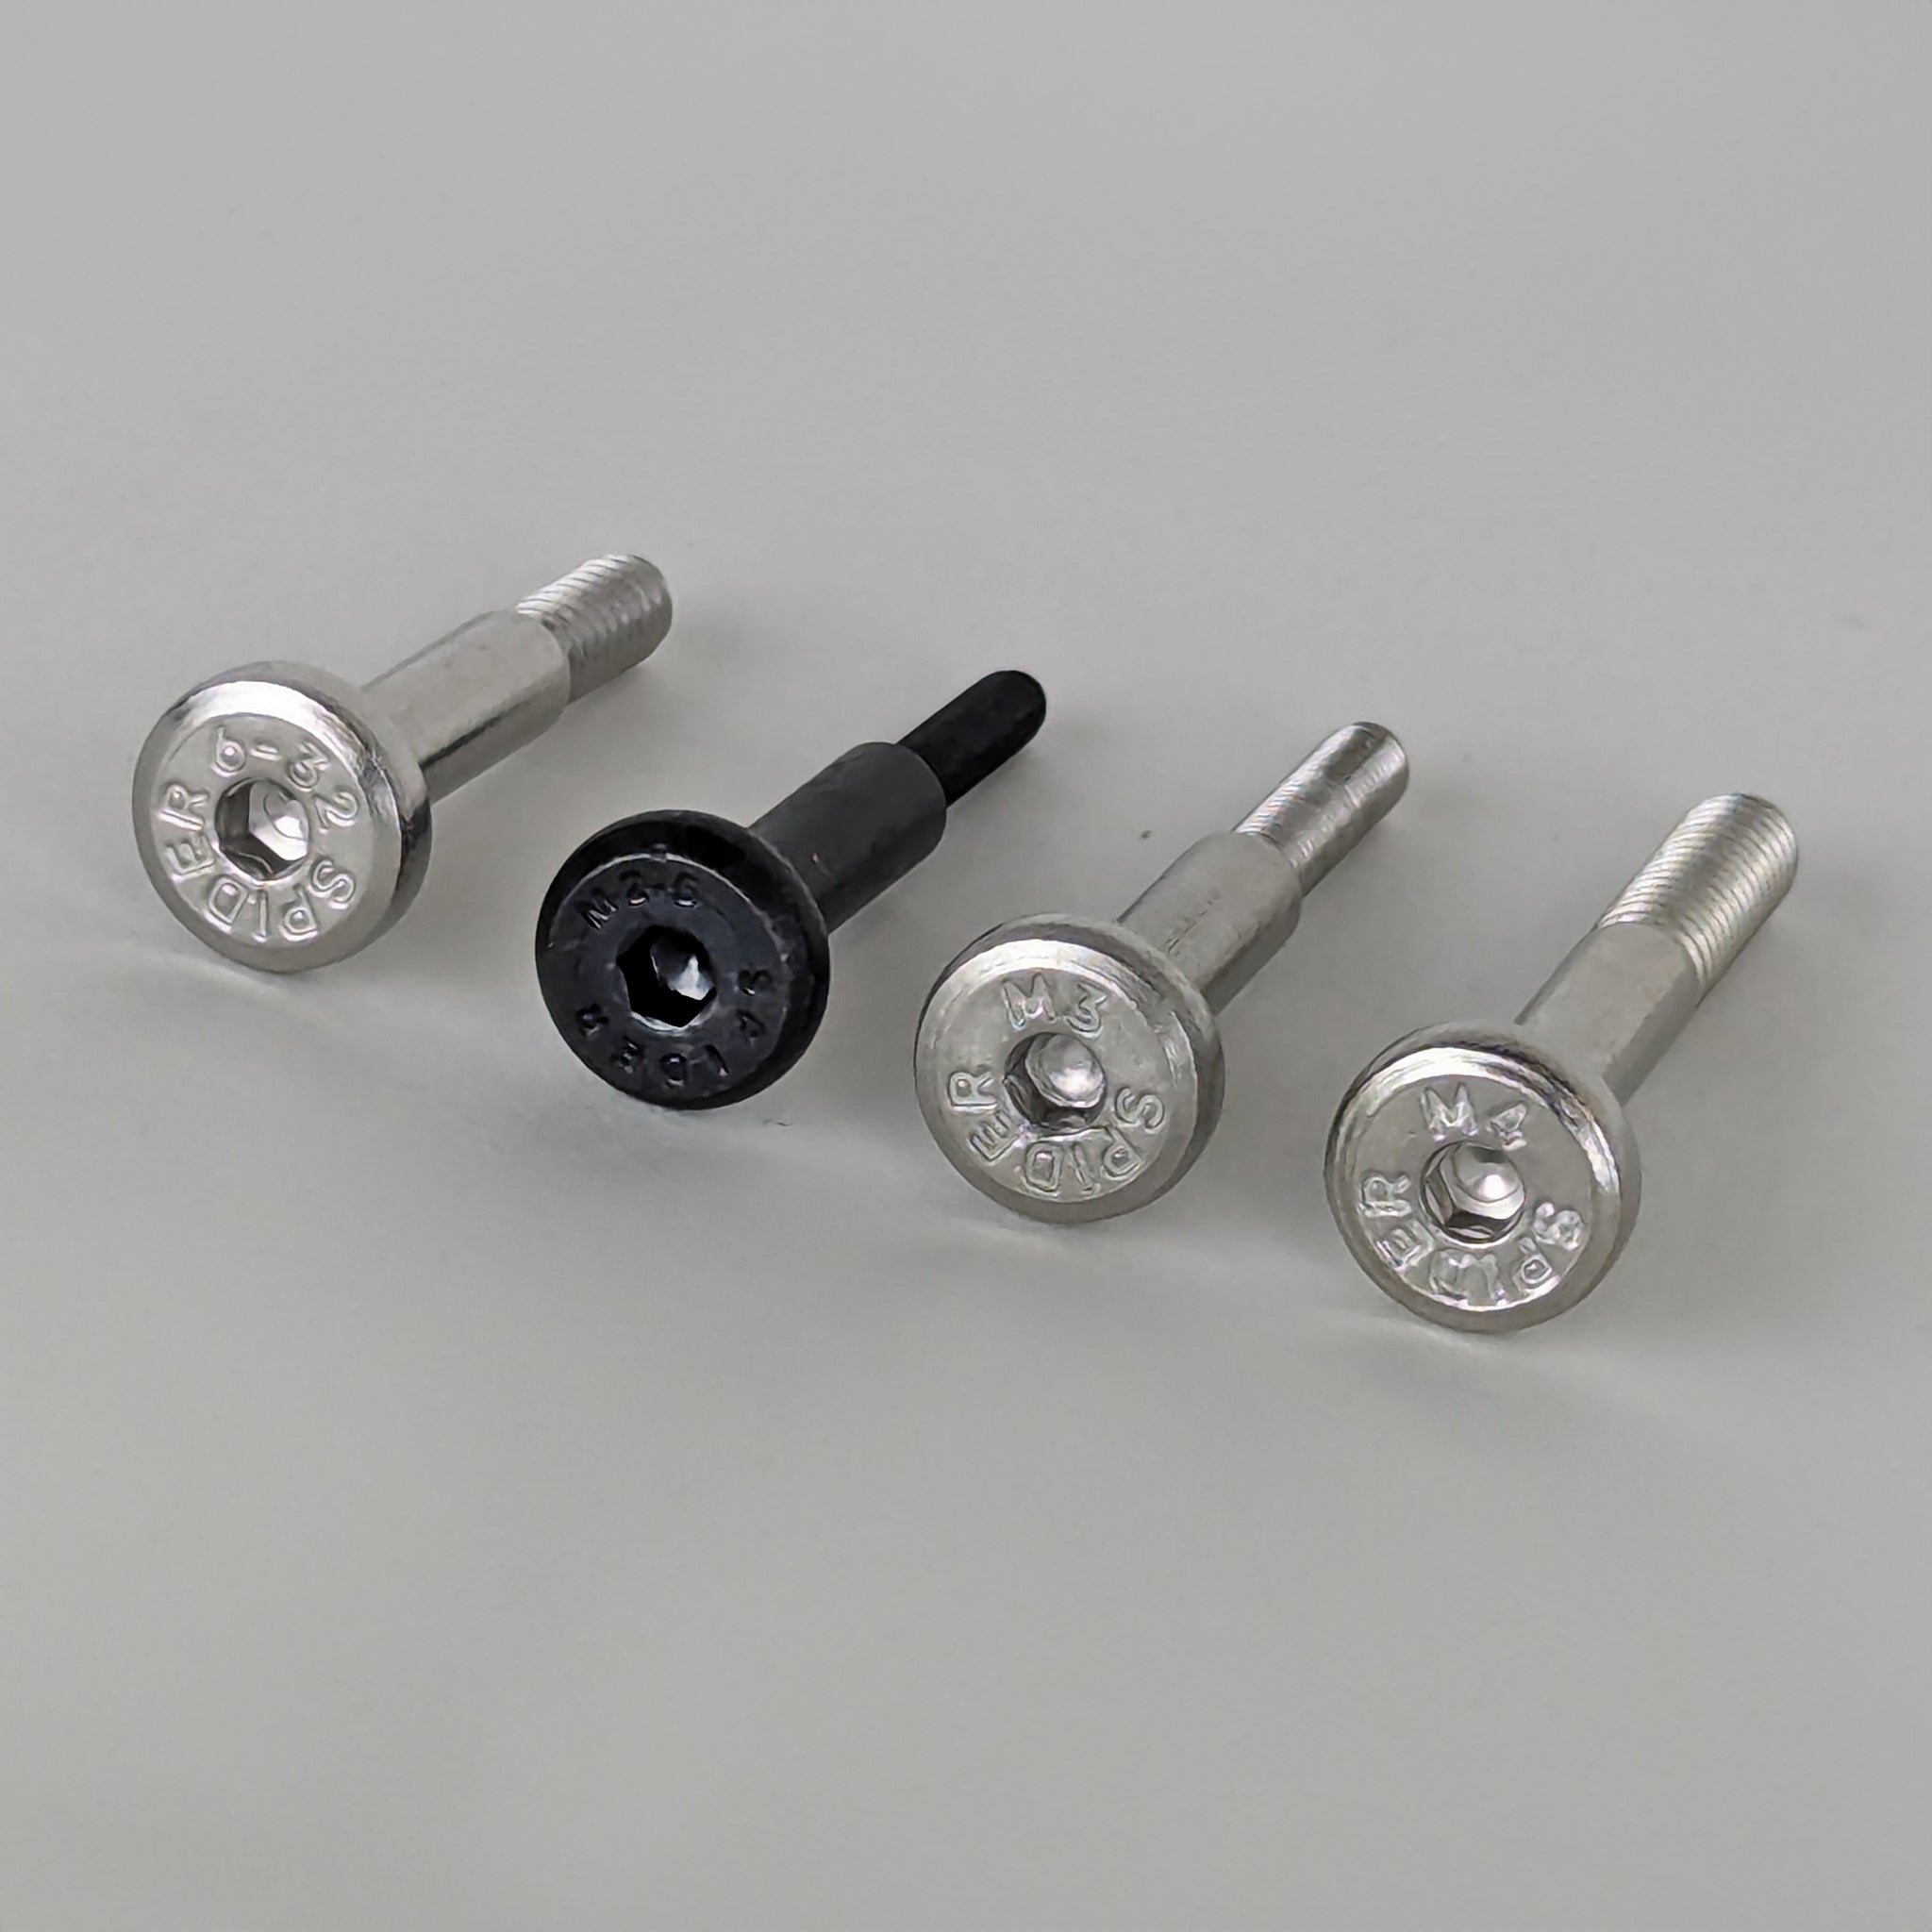 5695TH: Service Kit - Replacement Spider Bolts for Drill Pin (M2.5, M3, M4, #6-32)